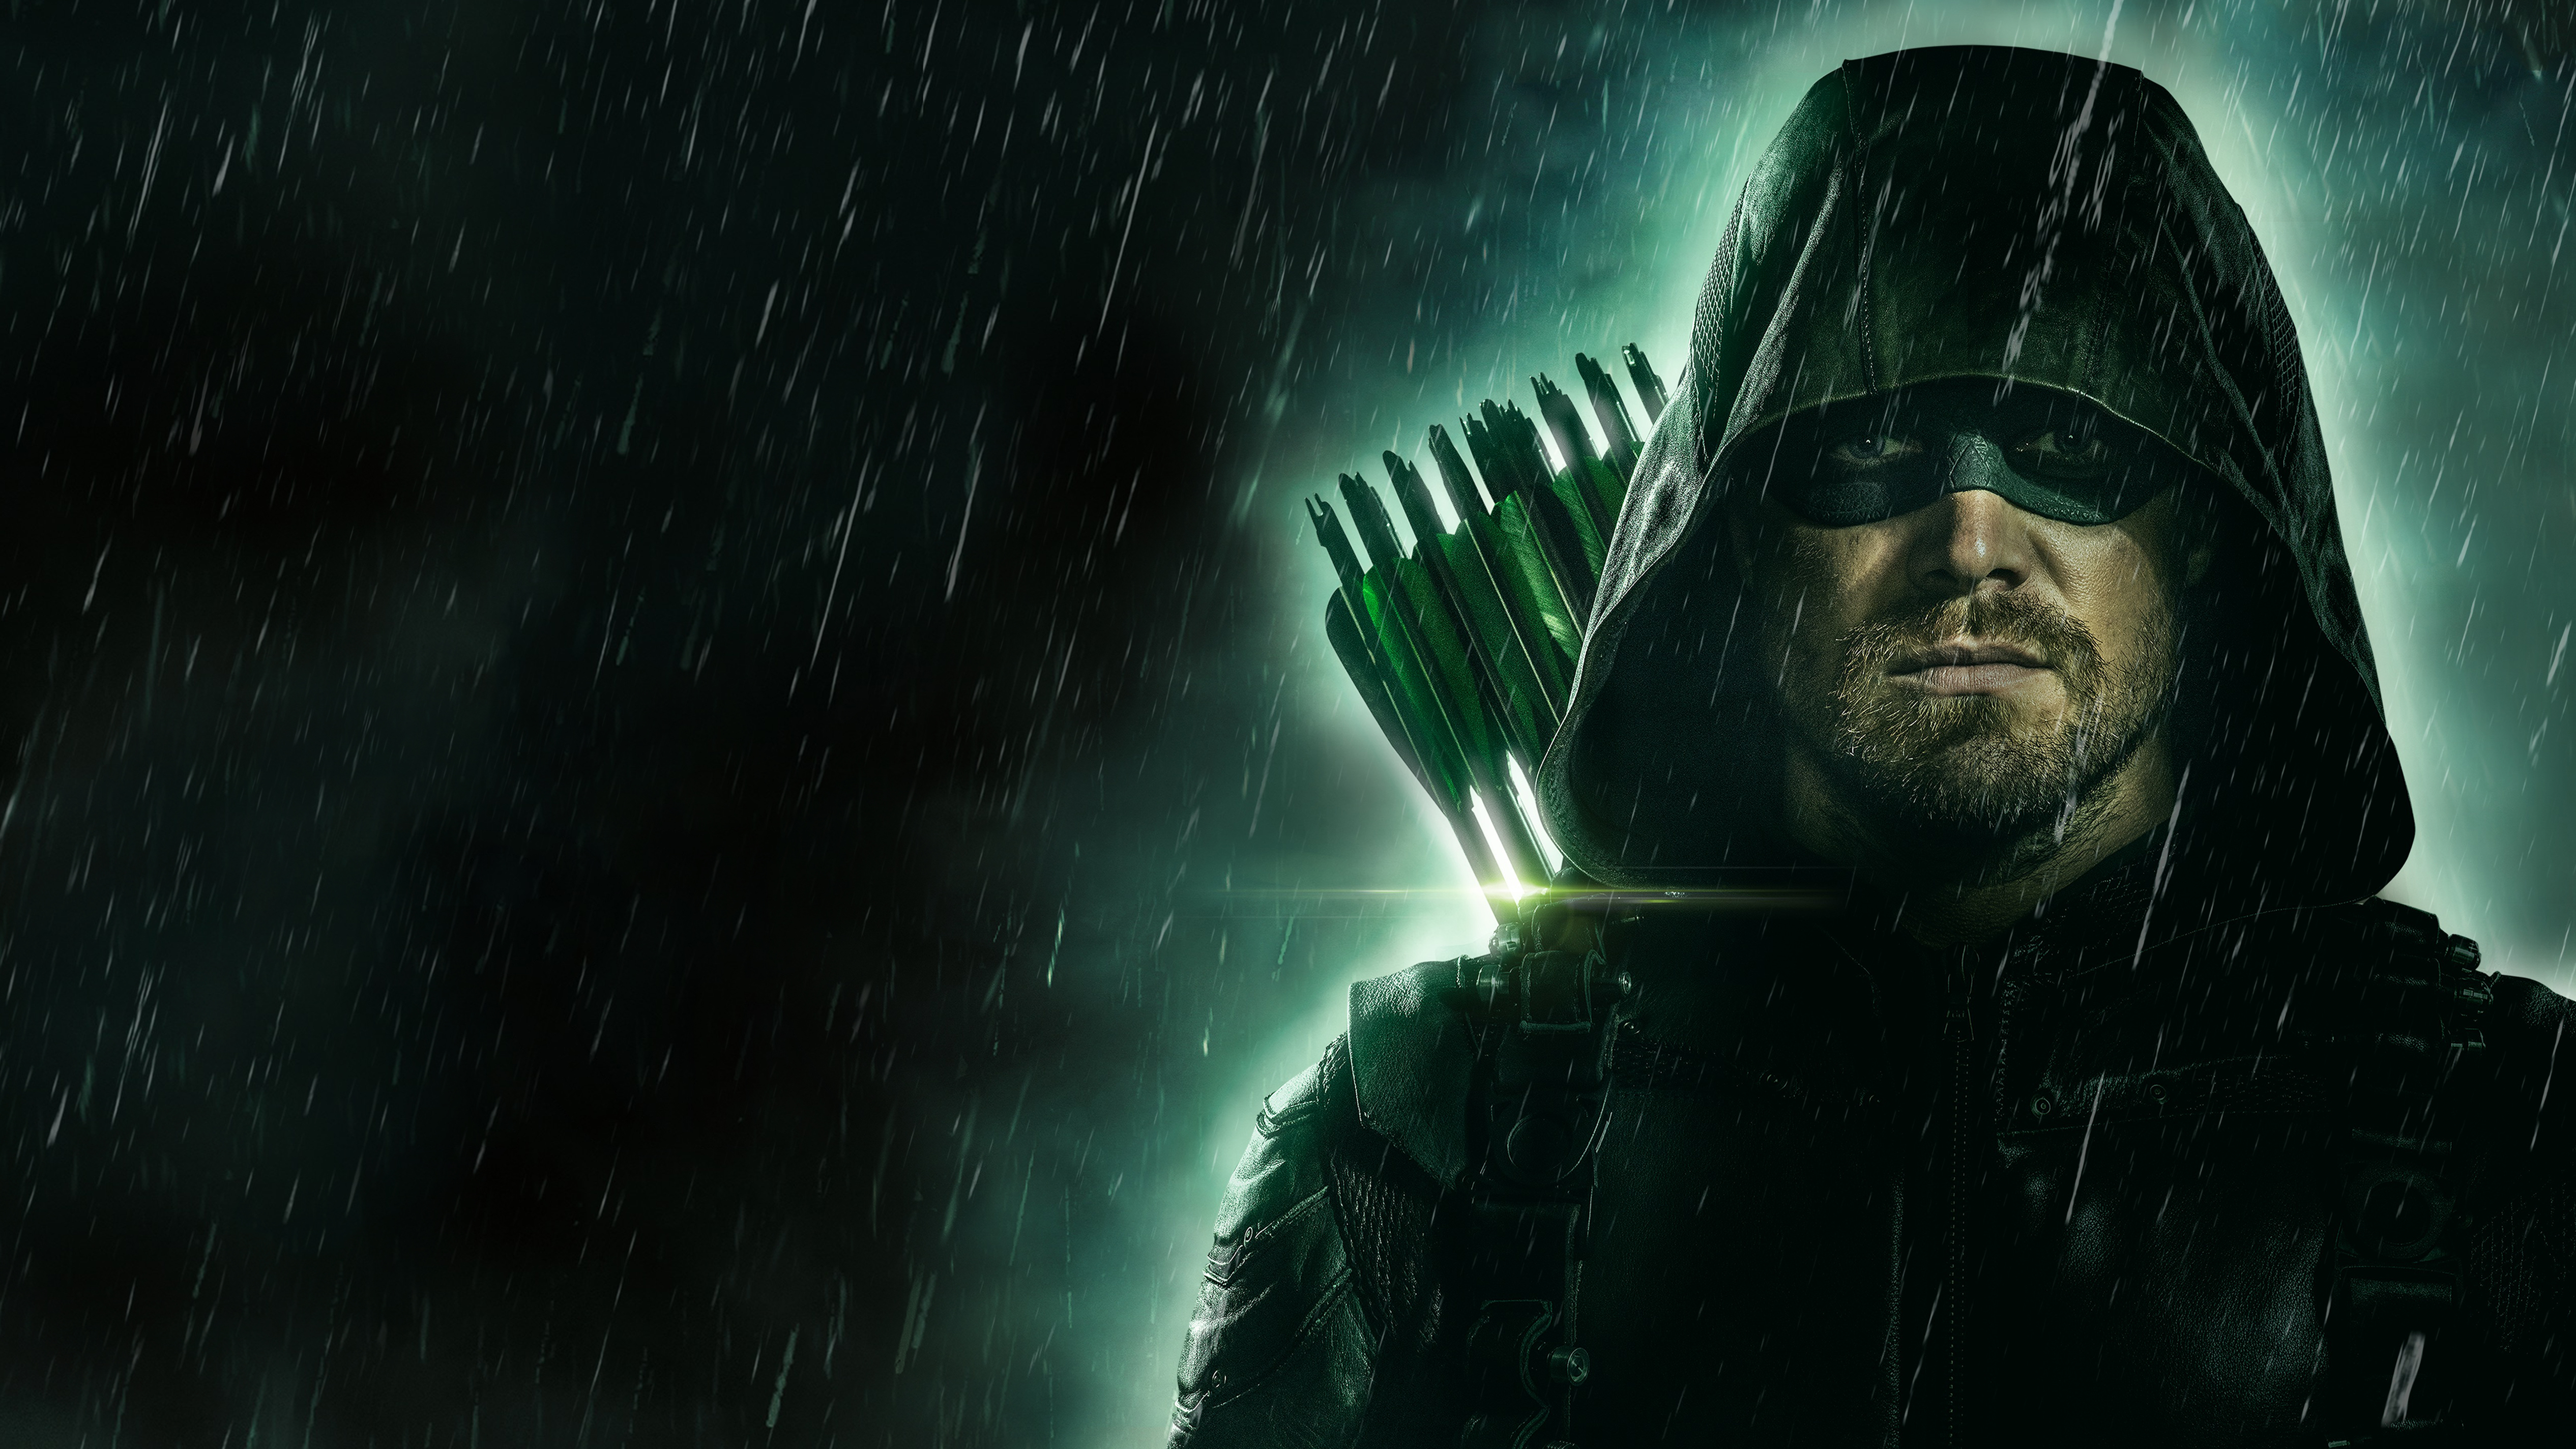 Green Arrow 4k 5k Hd Tv Shows 4k Wallpapers Images Backgrounds Photos And Pictures Hd wallpapers for pc (49 wallpapers). green arrow 4k 5k hd tv shows 4k